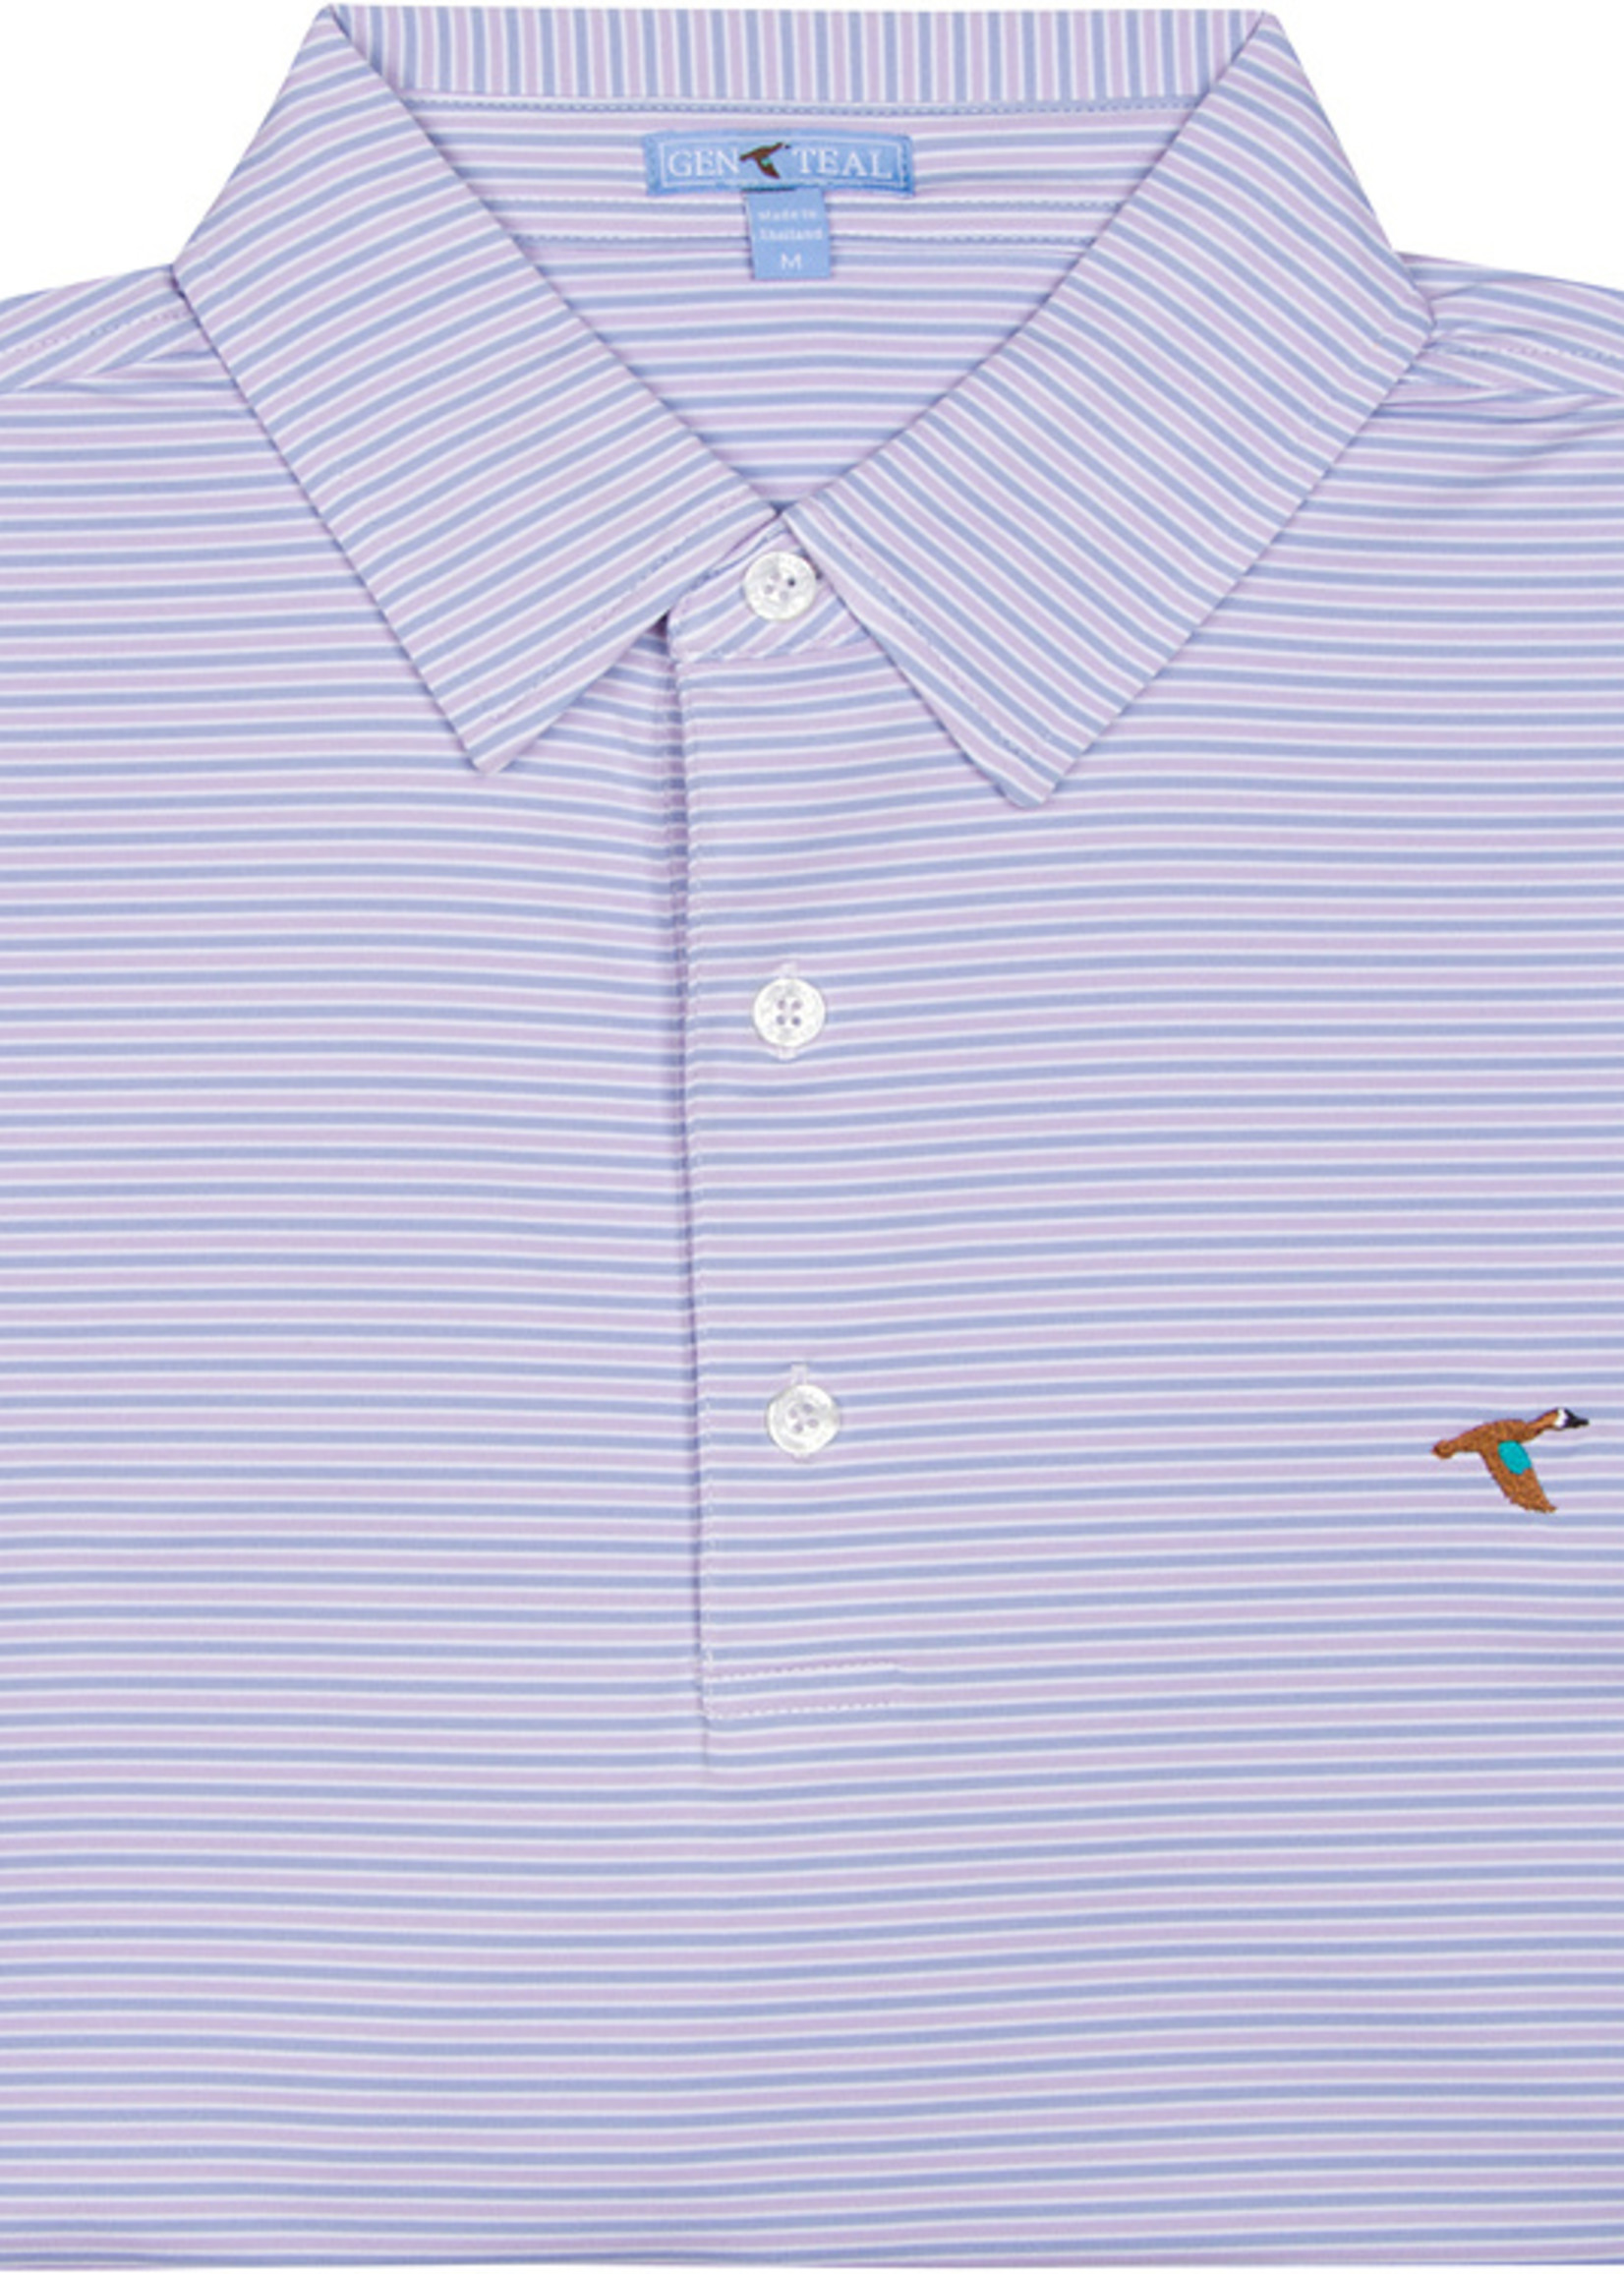 Genteal Mulberry Freeport Stripe Perfomance Polo